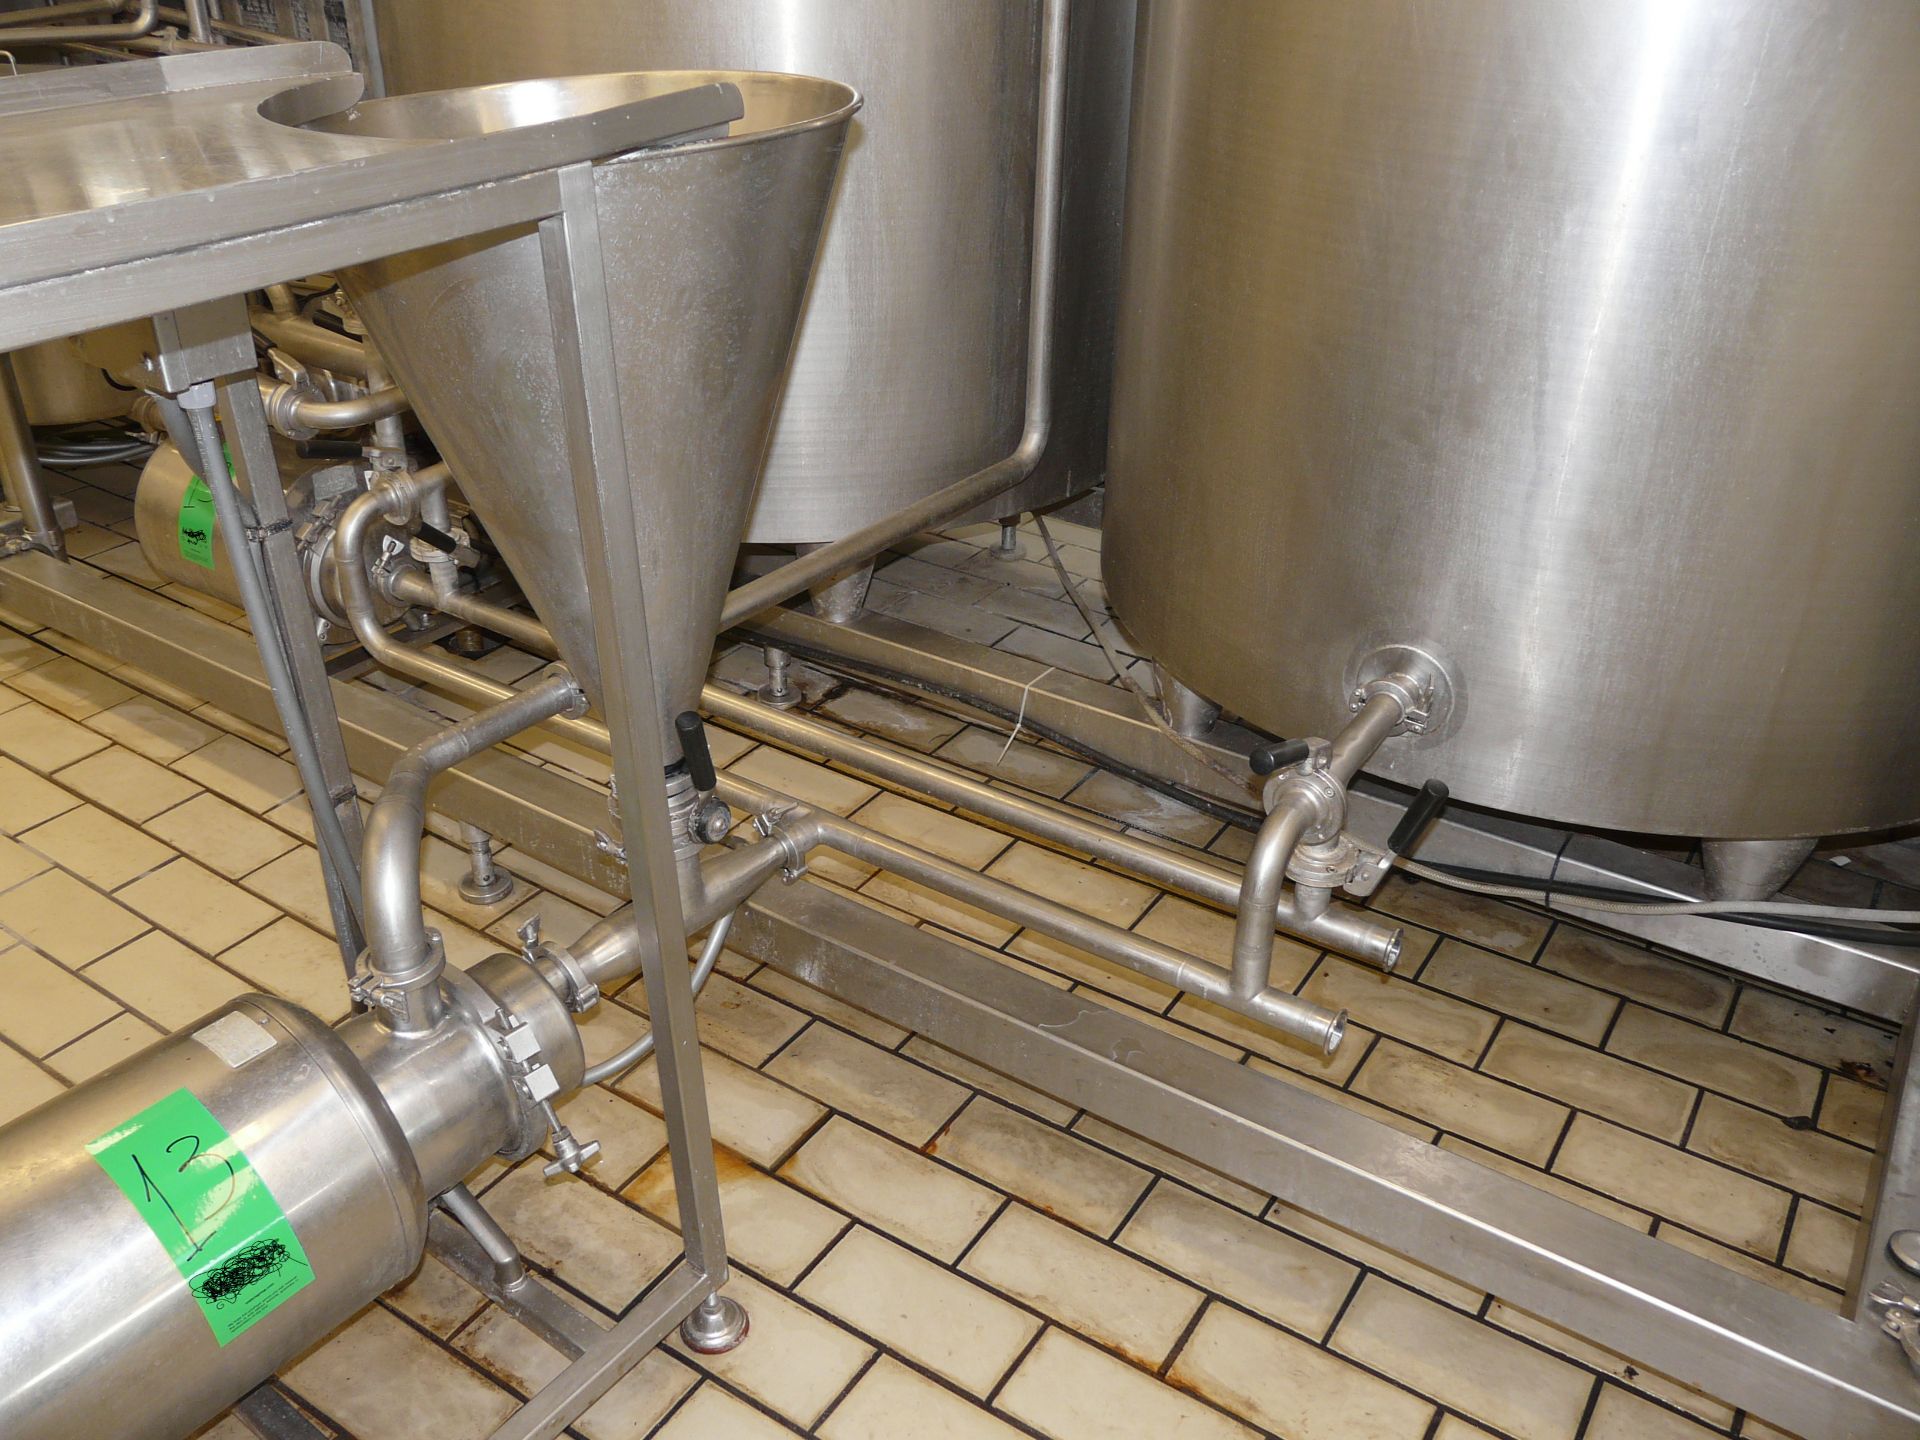 TETRA PAK HOYER HTST 1200 Pasteurizer for Ice Cream , Contains 2 x Tanks with agitators ,1 Plate - Image 3 of 20